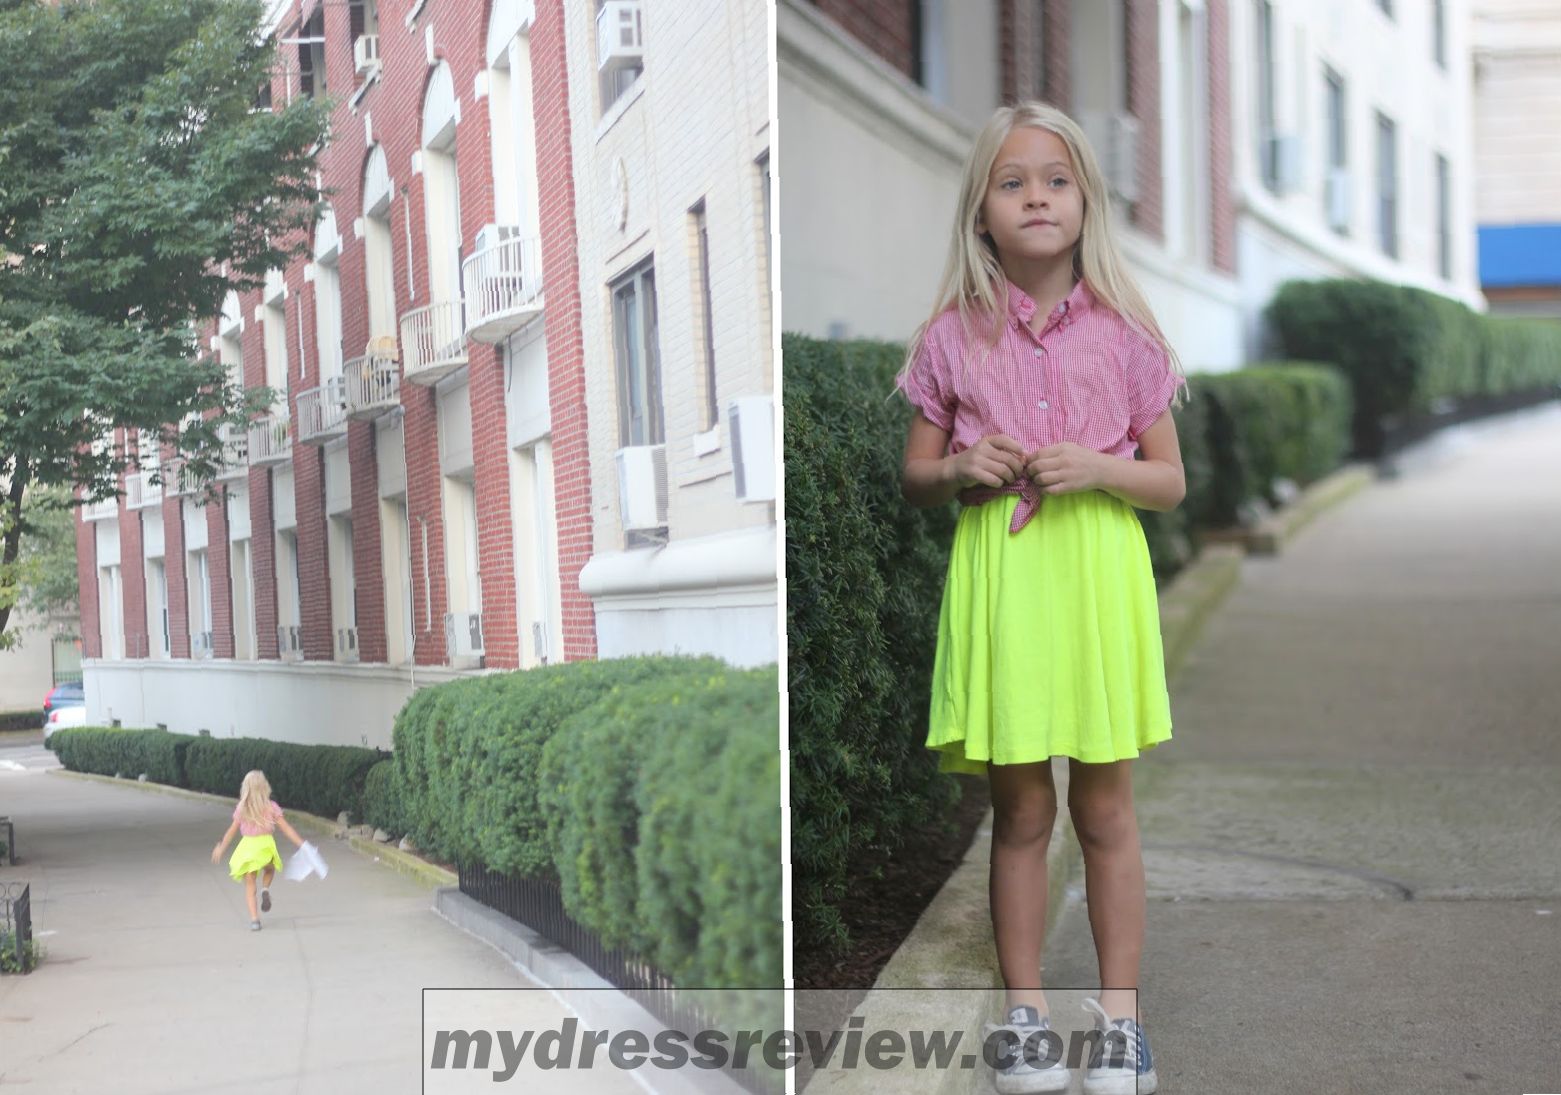 Boys Forced Dress Girls - Things To Know